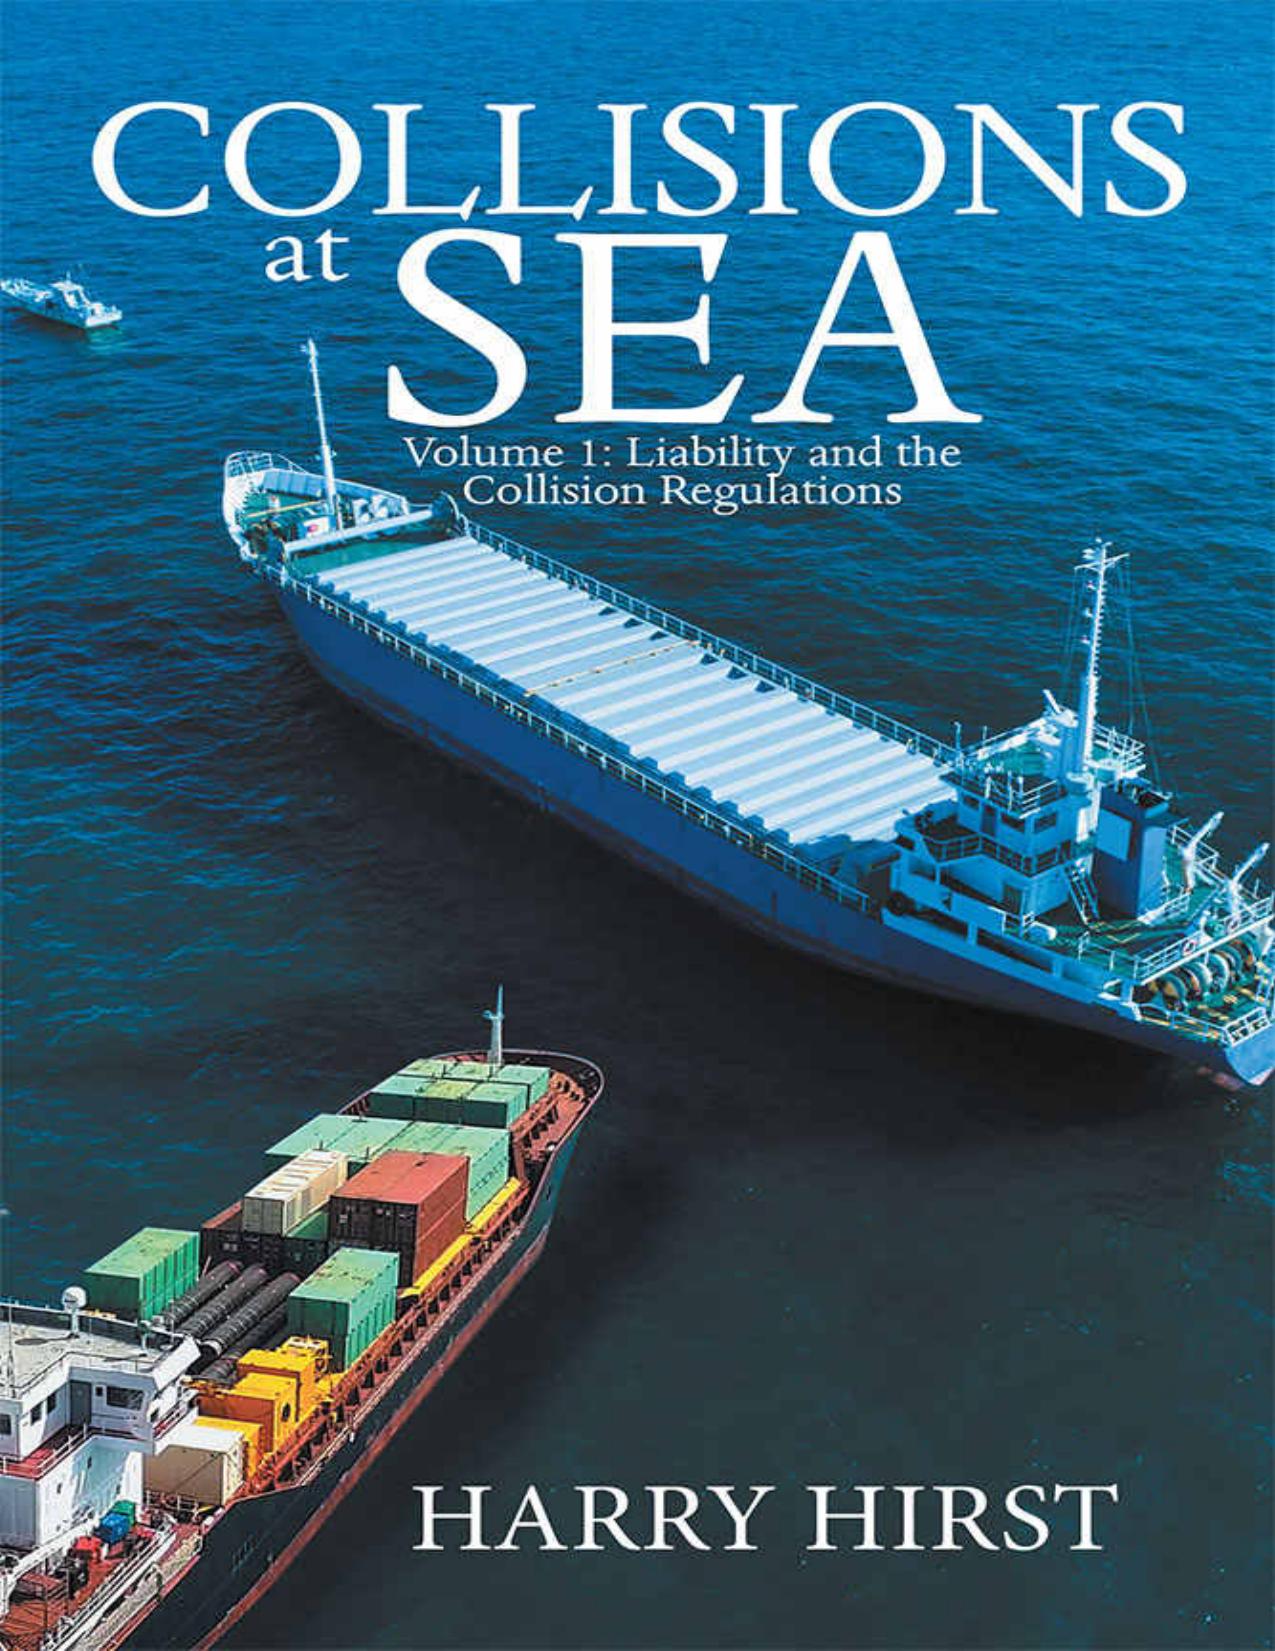 (eBook PDF)Collisions at Sea: Volume 1: Liability and the Collision Regulations by Harry Hirst